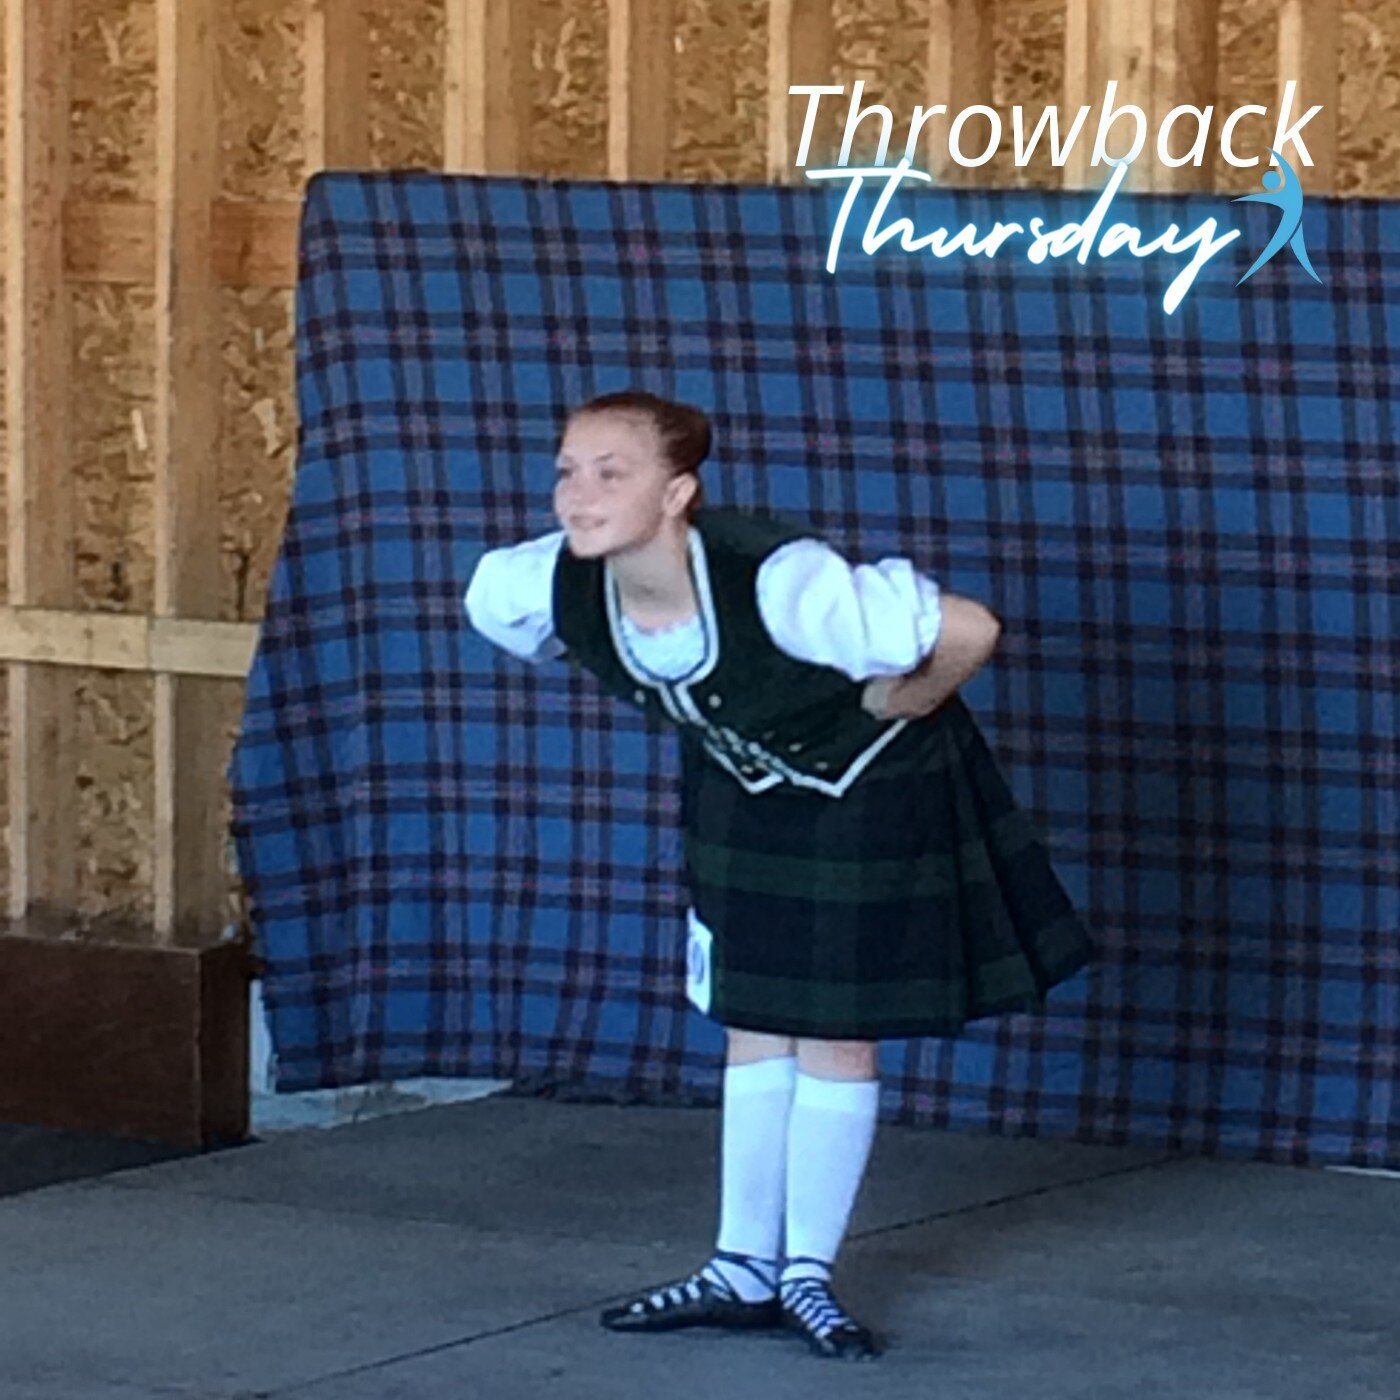 It's another #ThrowbackThursday! 💙

In this photo, Serena is bowing at the Almonte Highland Games ages ago - now she is one of our best substitute teachers and a Company Dancer of Caithream Celtic Dance Fusion!